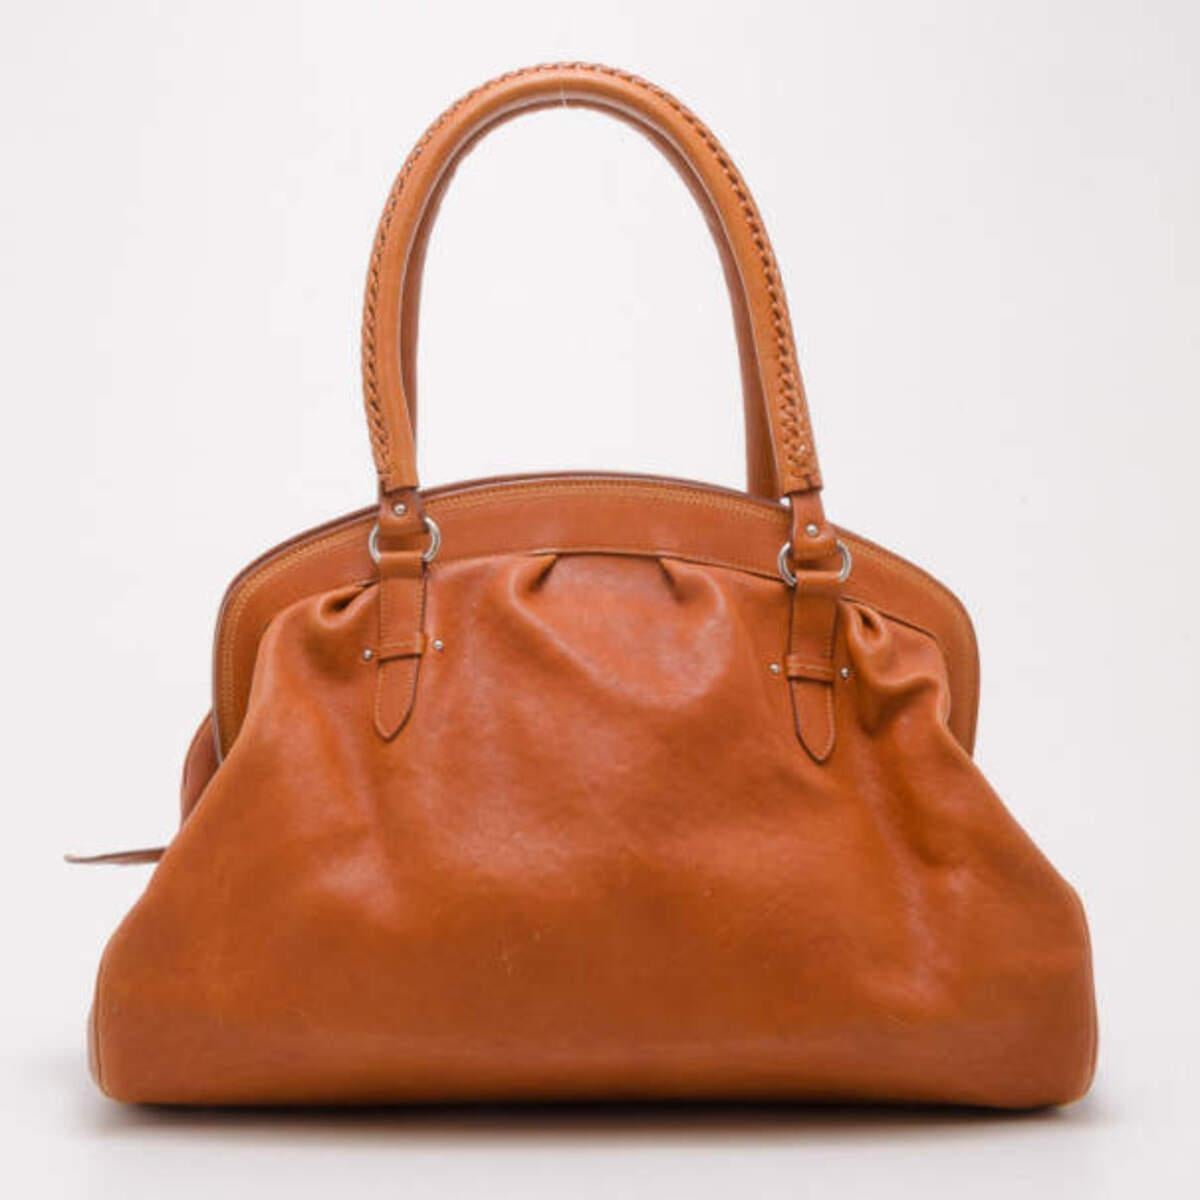 With its versatile color and classic shape, this satchel by Dior makes for a great everyday handbag. Made from smooth tan leather, the exterior features two front pockets, a Dior motif and double handles with bold stitching. Its large leather lined